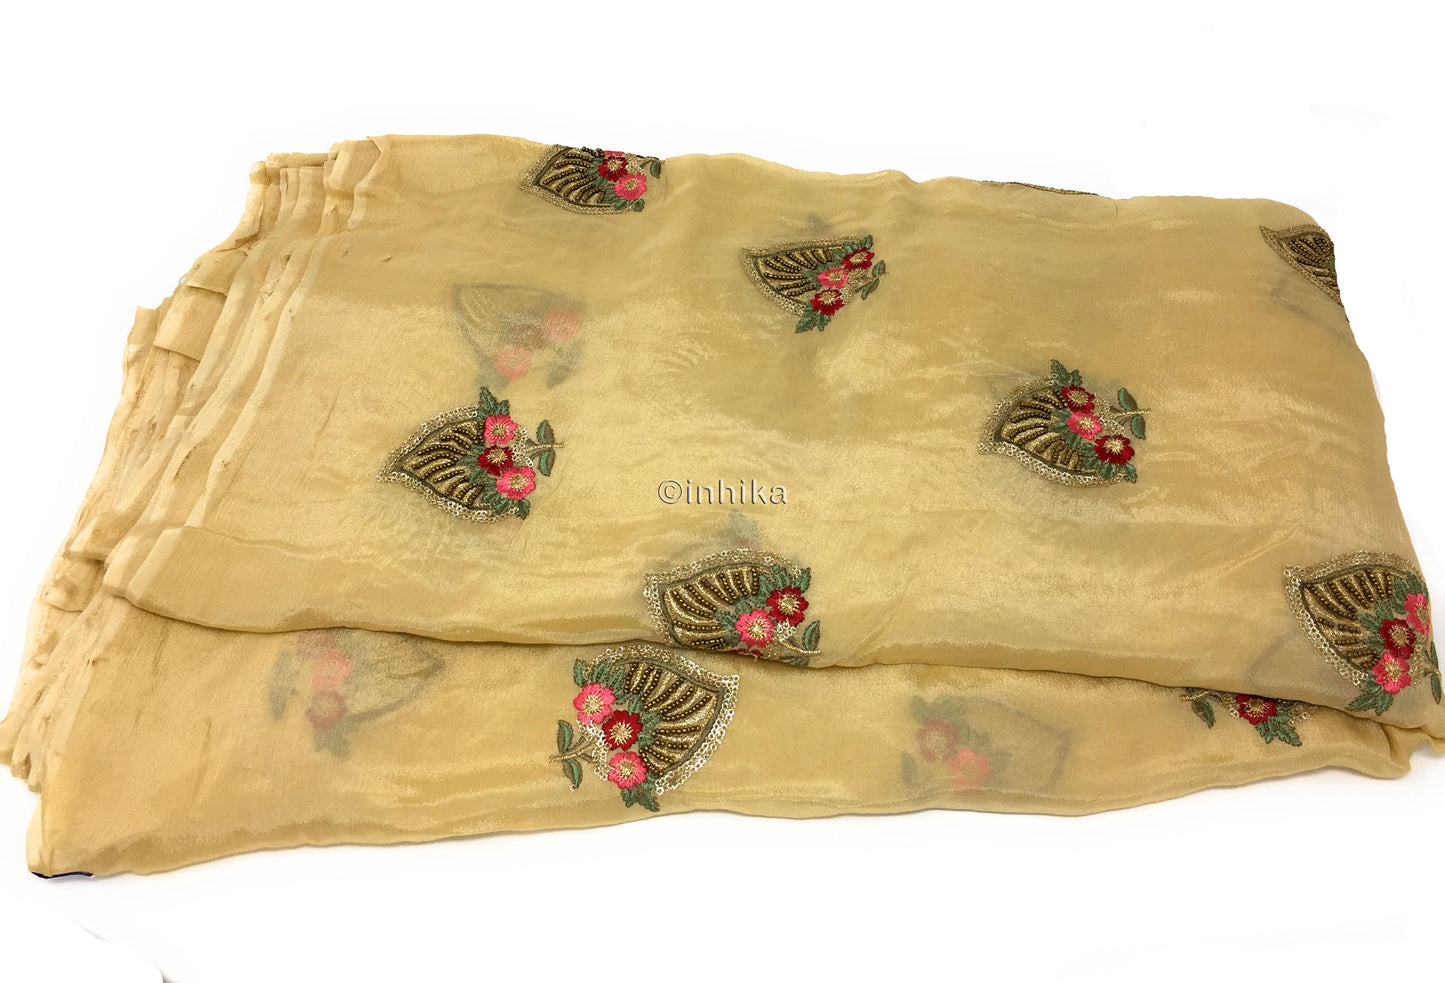 Beige Chiffon Running Material with Embroidery